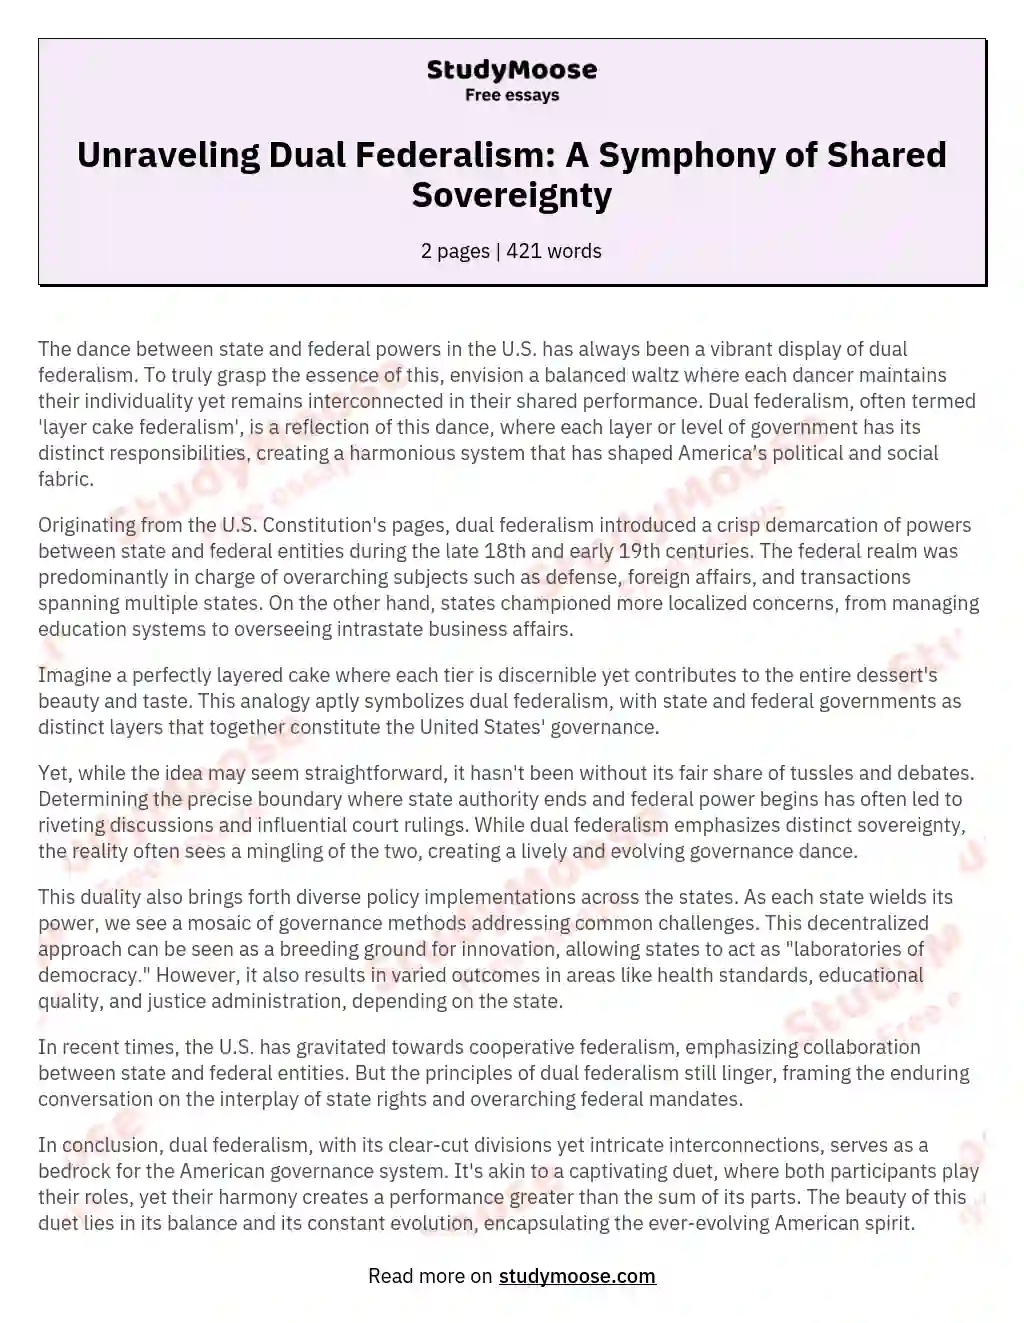 Unraveling Dual Federalism: A Symphony of Shared Sovereignty essay